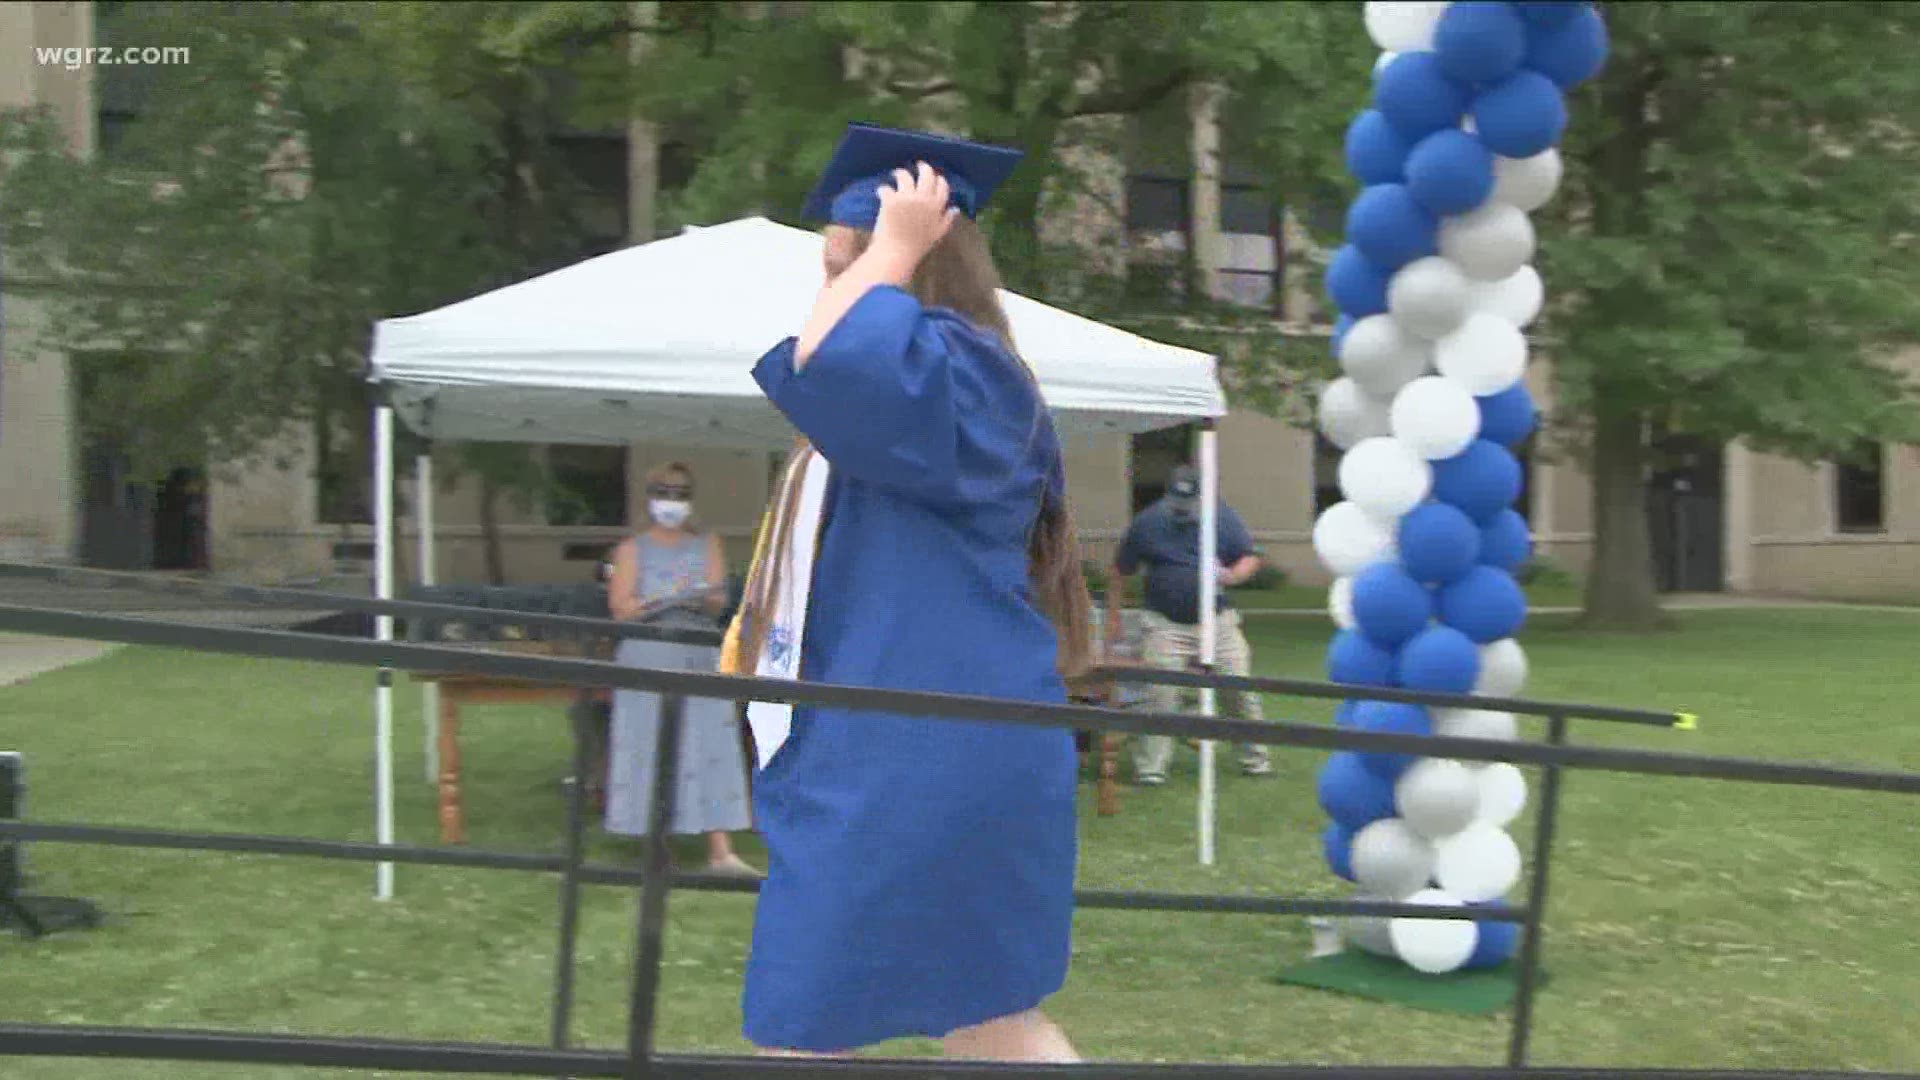 Today, thousands of Western New York teens got to celebrate a huge accomplishment in a way they never expected.